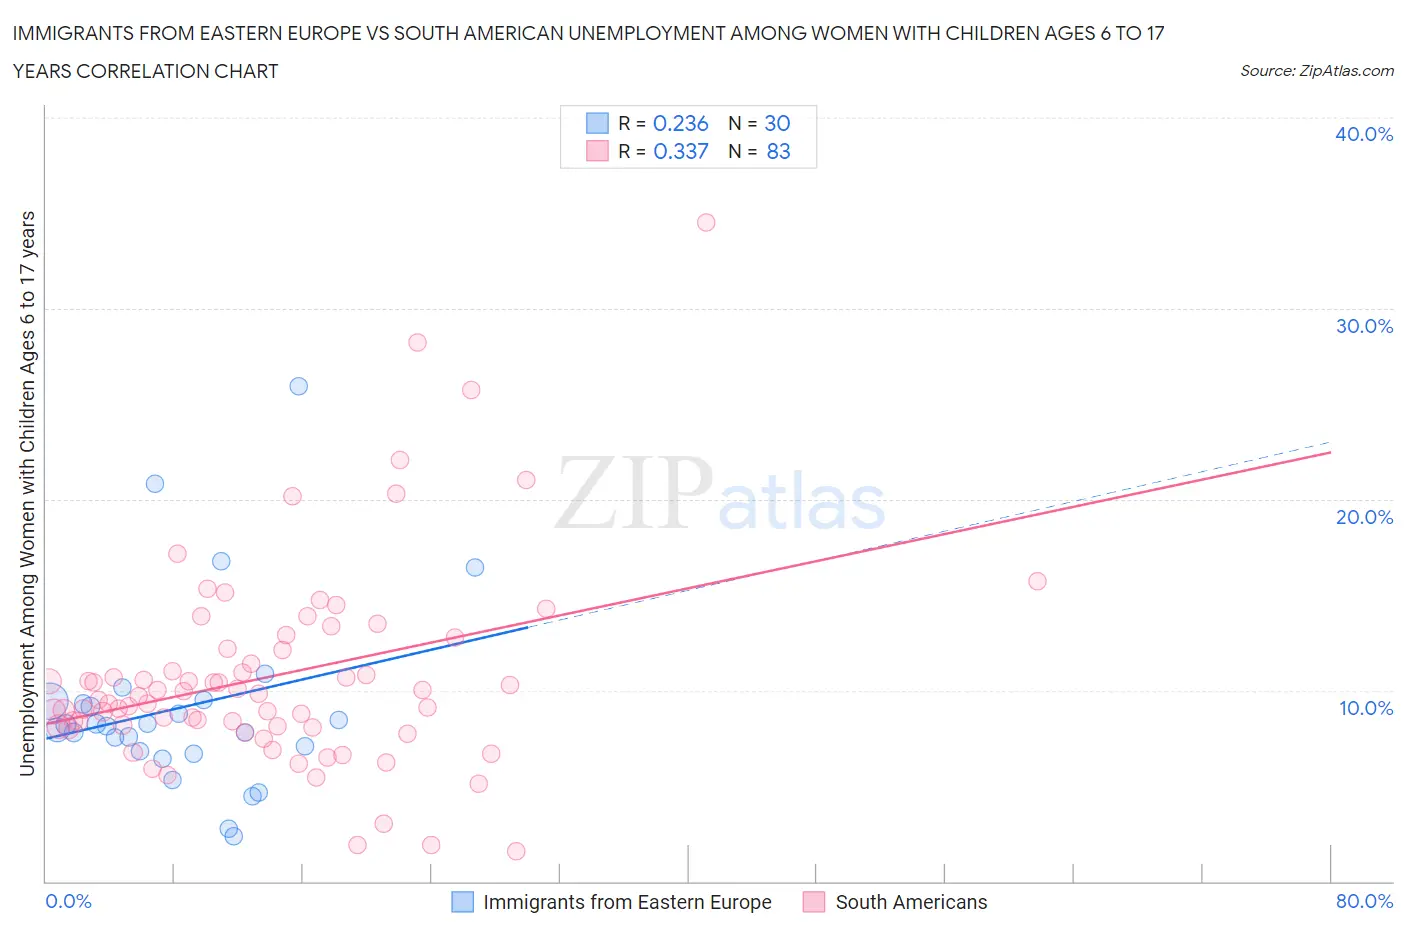 Immigrants from Eastern Europe vs South American Unemployment Among Women with Children Ages 6 to 17 years